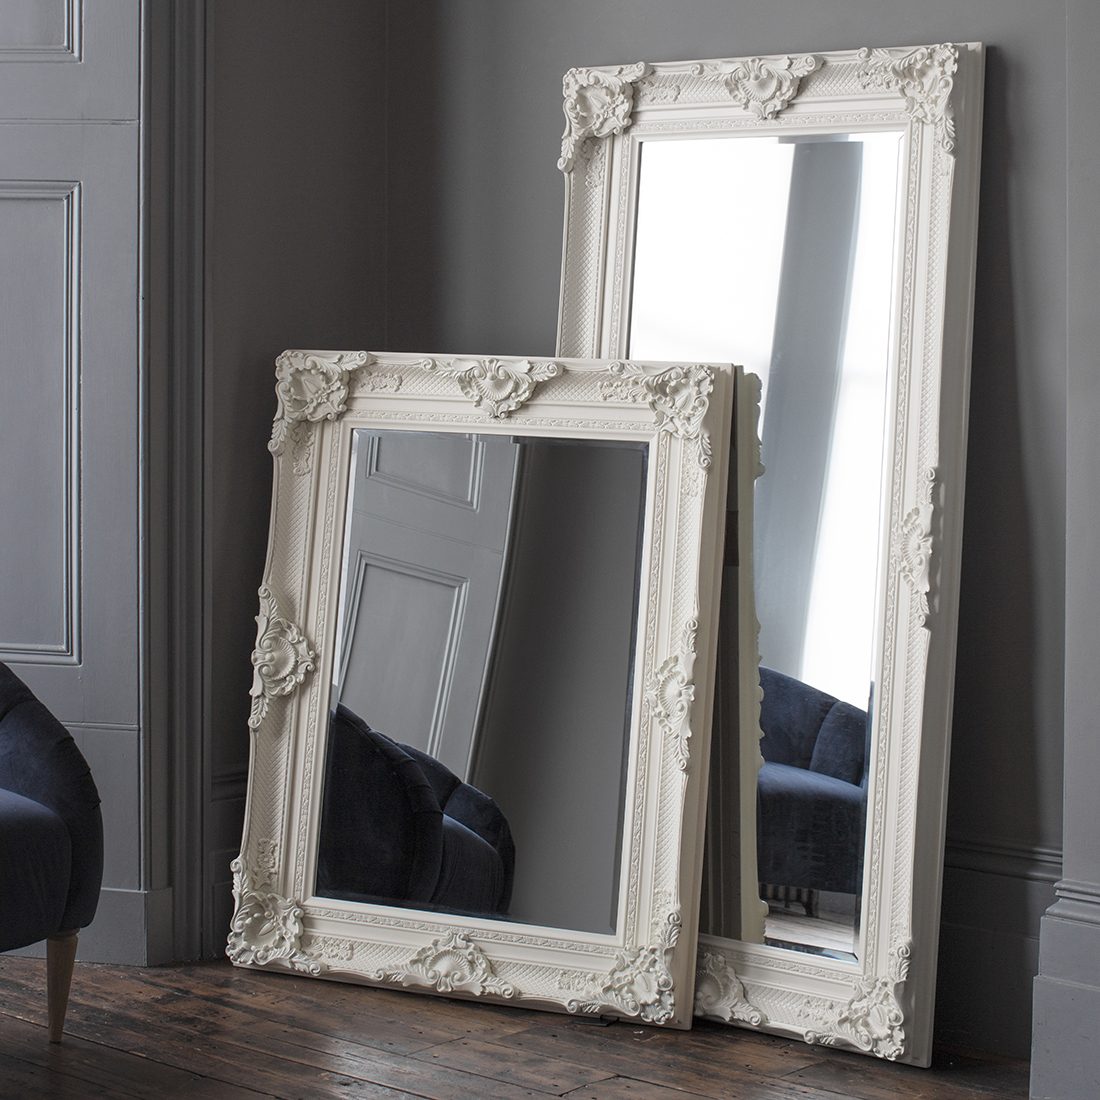 Ivory Ornate Wall Floor Mirror, How To Place A Floor Mirror